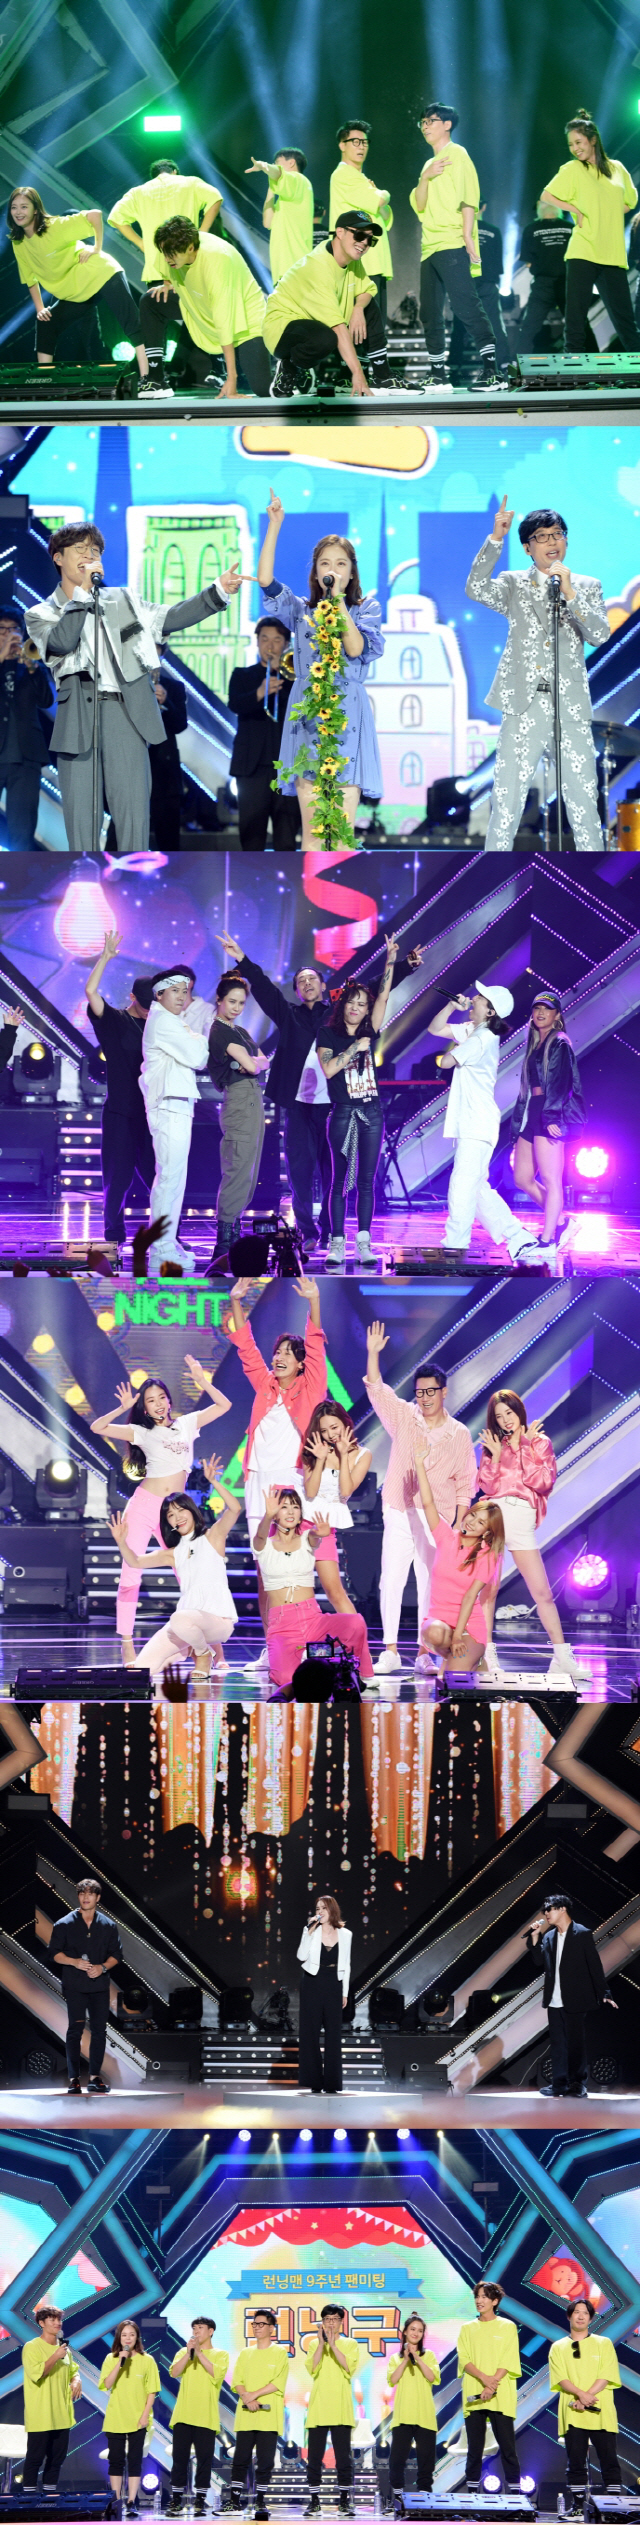 SBS Running Man Nine-year anniversary fan meeting T-Shirt will visit viewers once again with SEK organization thanks to the support of fans.It was a historical stage, as well as individual stages of members, as well as group dance, Running Man theme song, and a collaboration stage with top artists.About 2,400 fans participated in the T-Shirt fan meeting held on the 26th of last month, and they breathed hot with the members.Song Ji-hyo X Yang Se-chan X Nuxal & Cod Kunst formed Hyochan Park to sing Bongjur High with limited express guest Yoon Mi-rae, and Pico Light Ji Suk-jin X Lee Kwang-soo X A Pink raised the atmosphere with an addictive dance song Party.Yoo Jae-Suk X Jeon So-min X The Jeon So-min, which is a collection of the disturbances, sets the Best Decibel record with Come out now Confessions, which contains the experiences of Jeon So-min, while the F-killer I set up a ballad stage for the unfavorable game.Shortly after the broadcast, their stage drew a hot response: ratings rose for three consecutive weeks during the T-Shirt feature, and swept the top rankings of search terms on major portals.In particular, Aladdin OST Speechless, which Kim Jong Kook called, exceeded 750,000 views in one portal alone, and the group group video exceeded 500,000 views.The average number of views on major colaboration stages also exceeded 100,000 views, which is higher than usual.So SBS will organize SEK in October, which will show the performance of T-Shirt, reflecting the hot reaction of viewers.In addition, the T-Shirt sound source can be found on major music sites, and the proceeds will be donated in full.